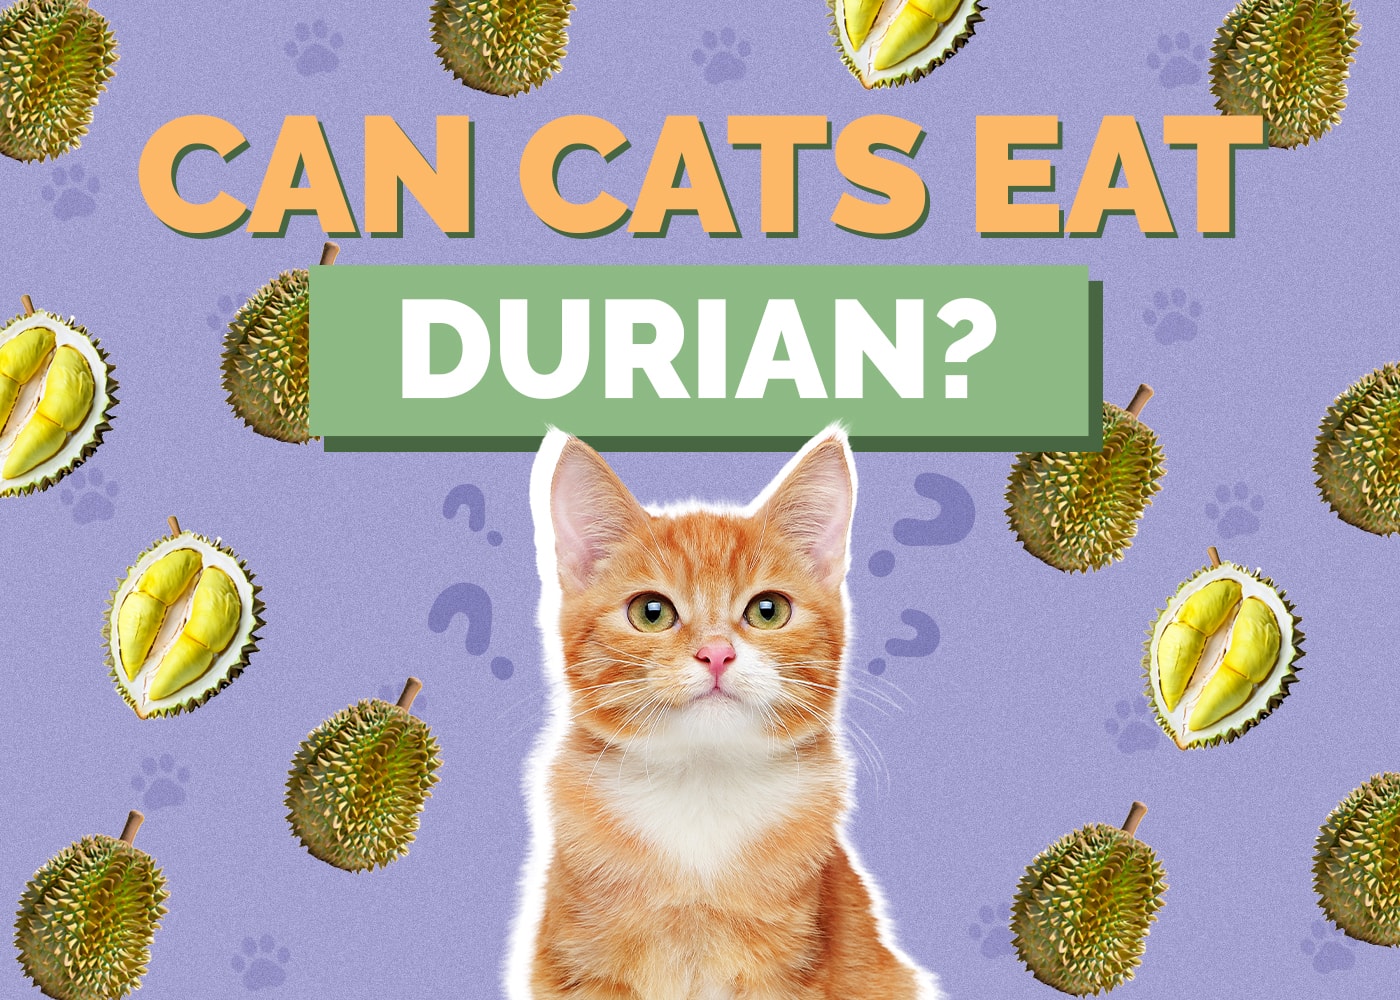 Can Cats Eat durian